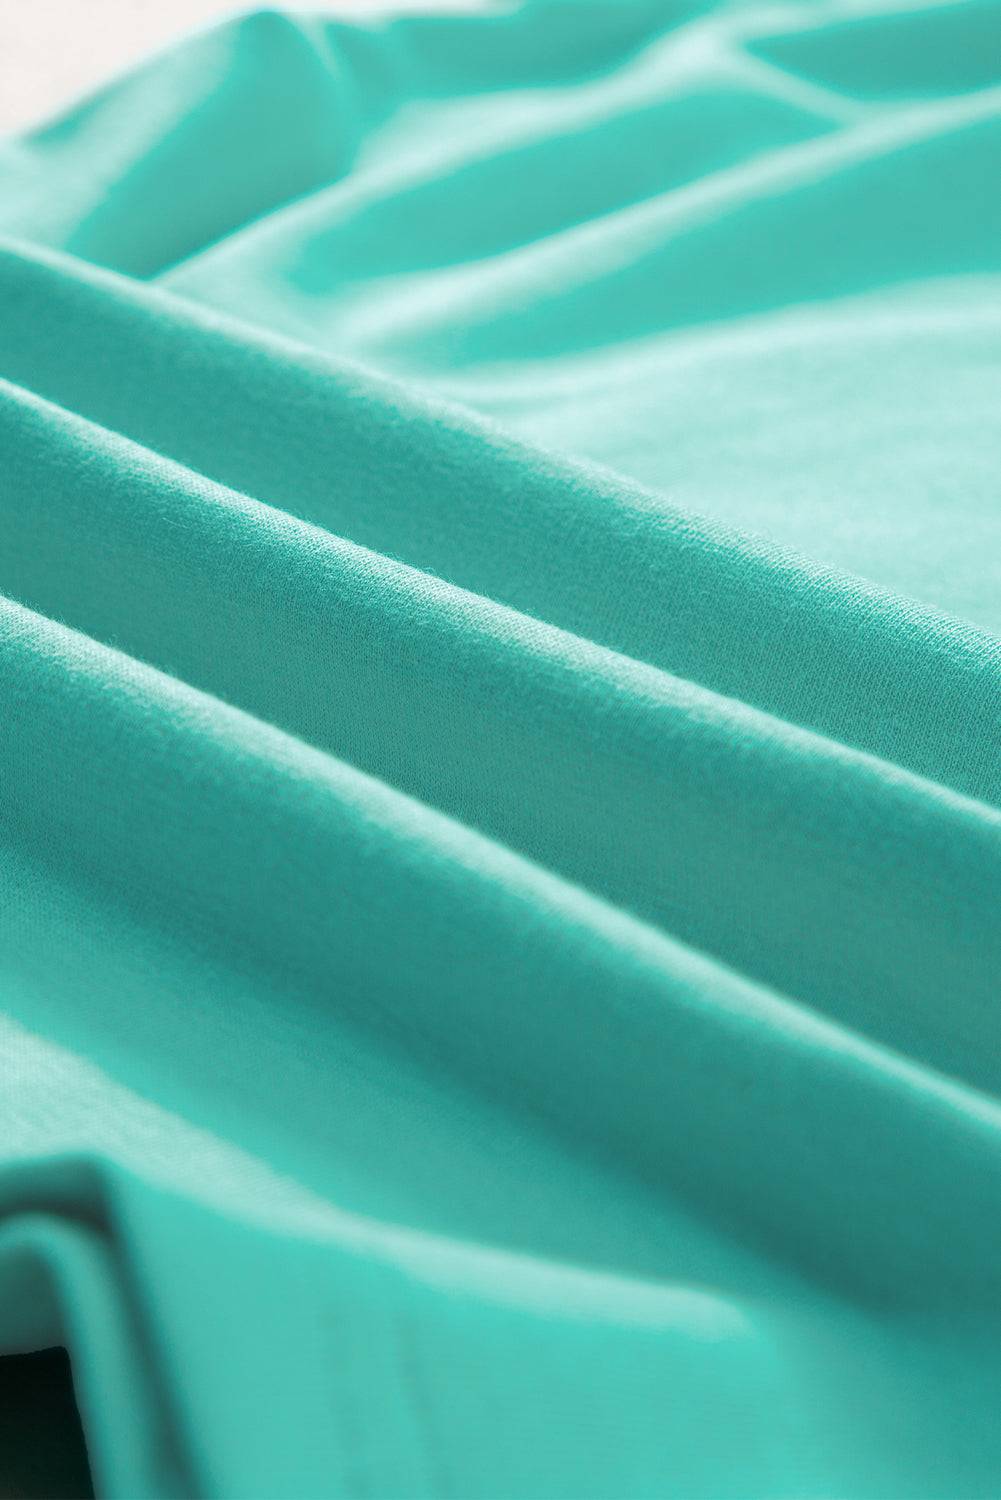 a close up of a turquoise colored fabric